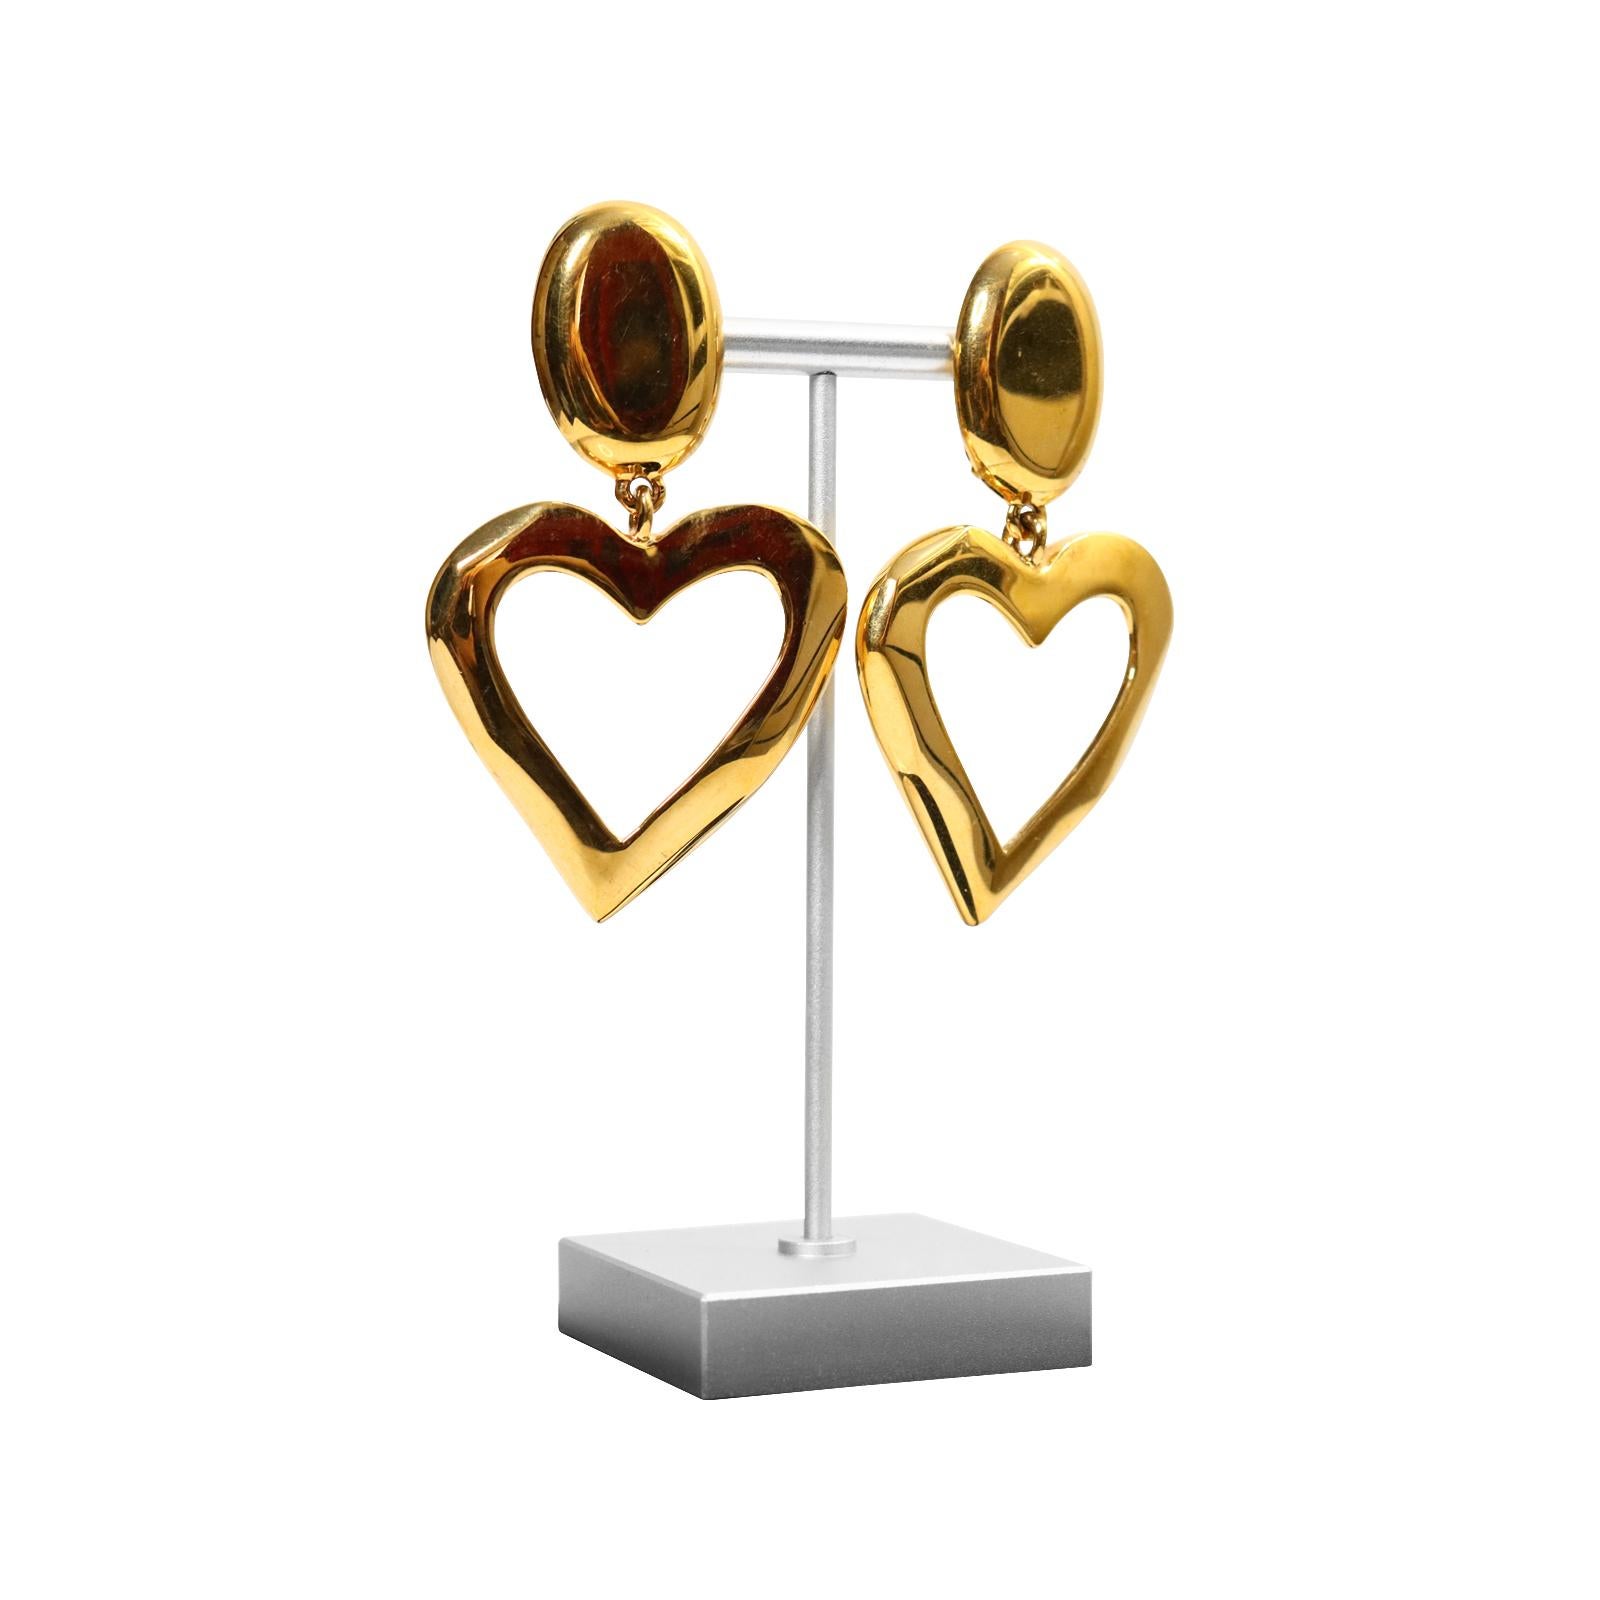 Contemporary Vintage St John Gold Dangling Heart  Earrings Circa 1990s For Sale